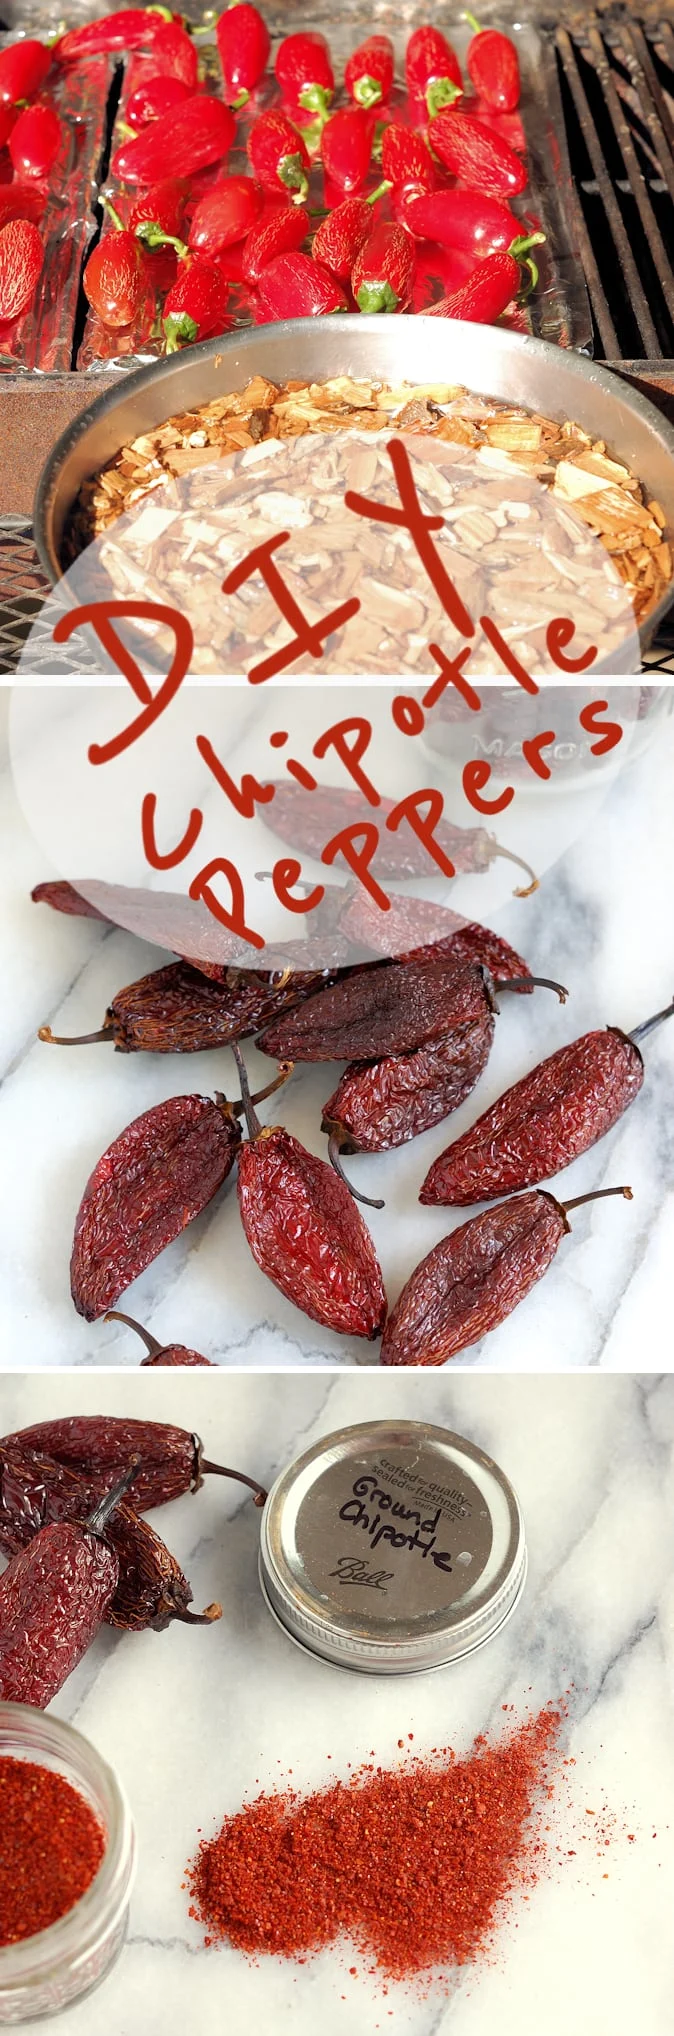 Make your own Chipotle Peppers. There is just one ingredient in this recipe, fresh jalapeno peppers. #howto #diy #homemade #smoked